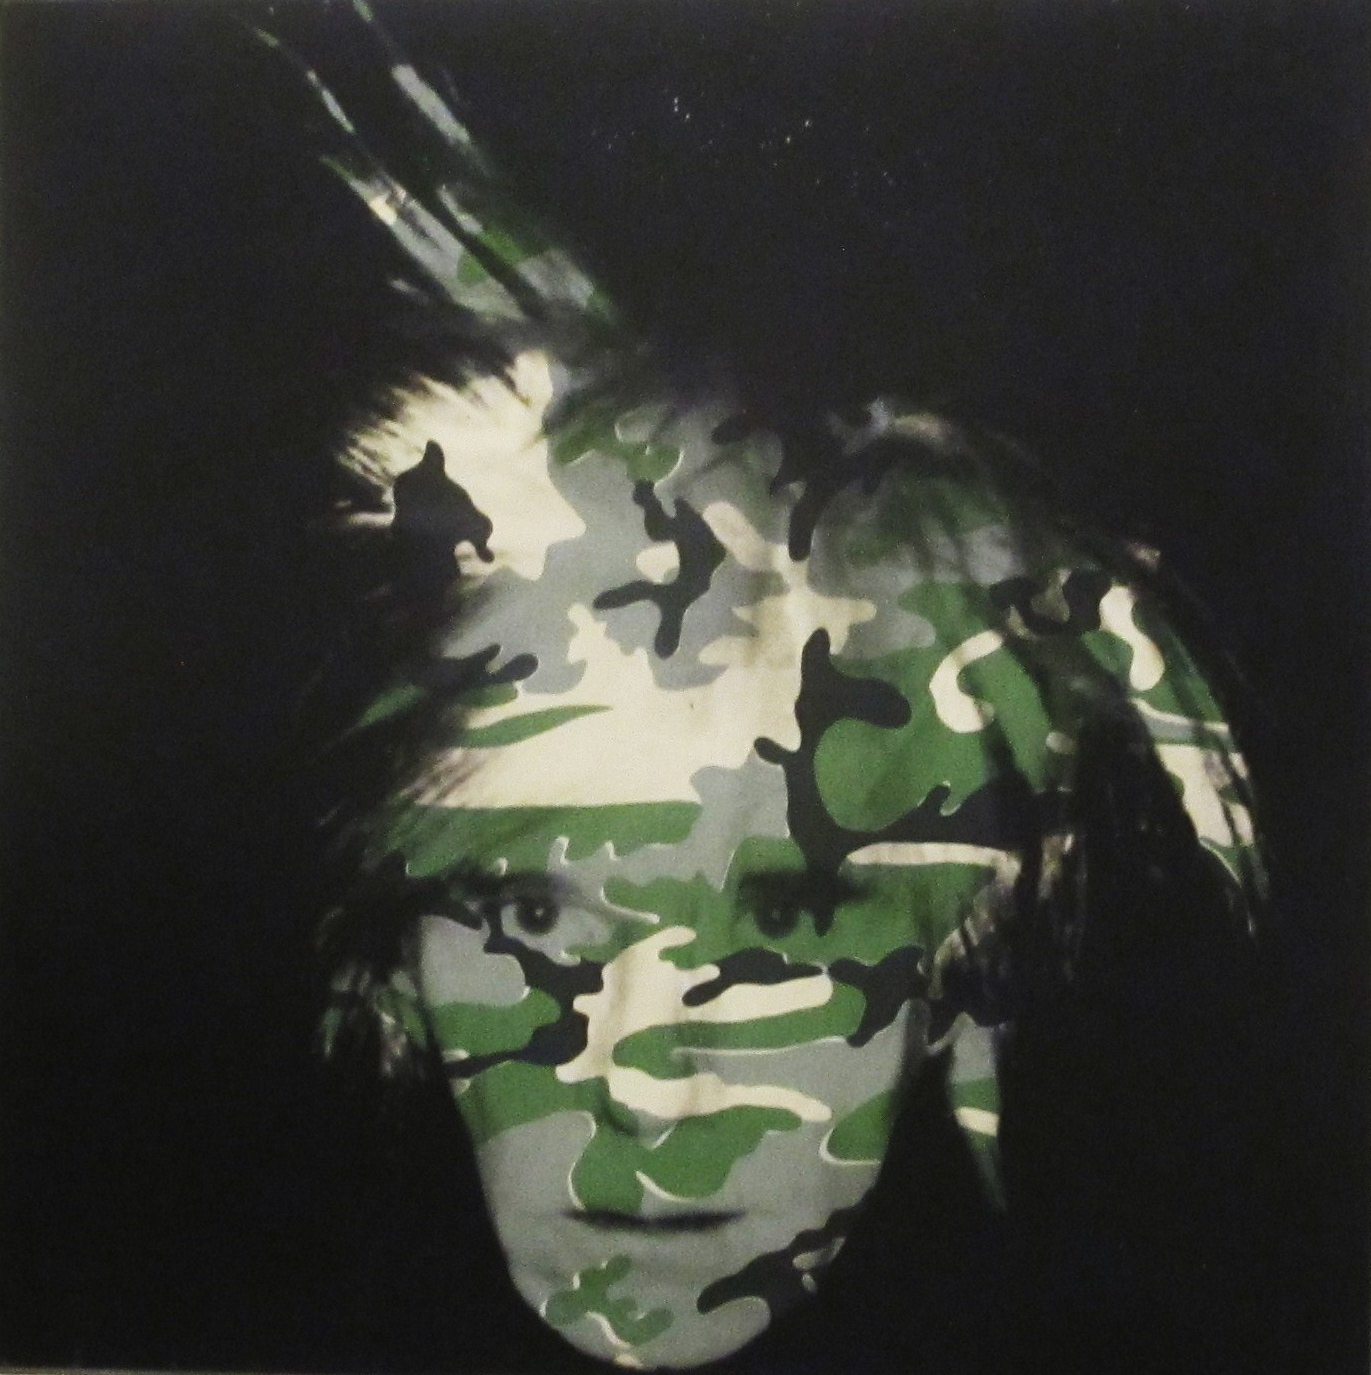 Stephen Sprouse, ANDY WARHOL CAMOUFLAGE JACKET (1987)